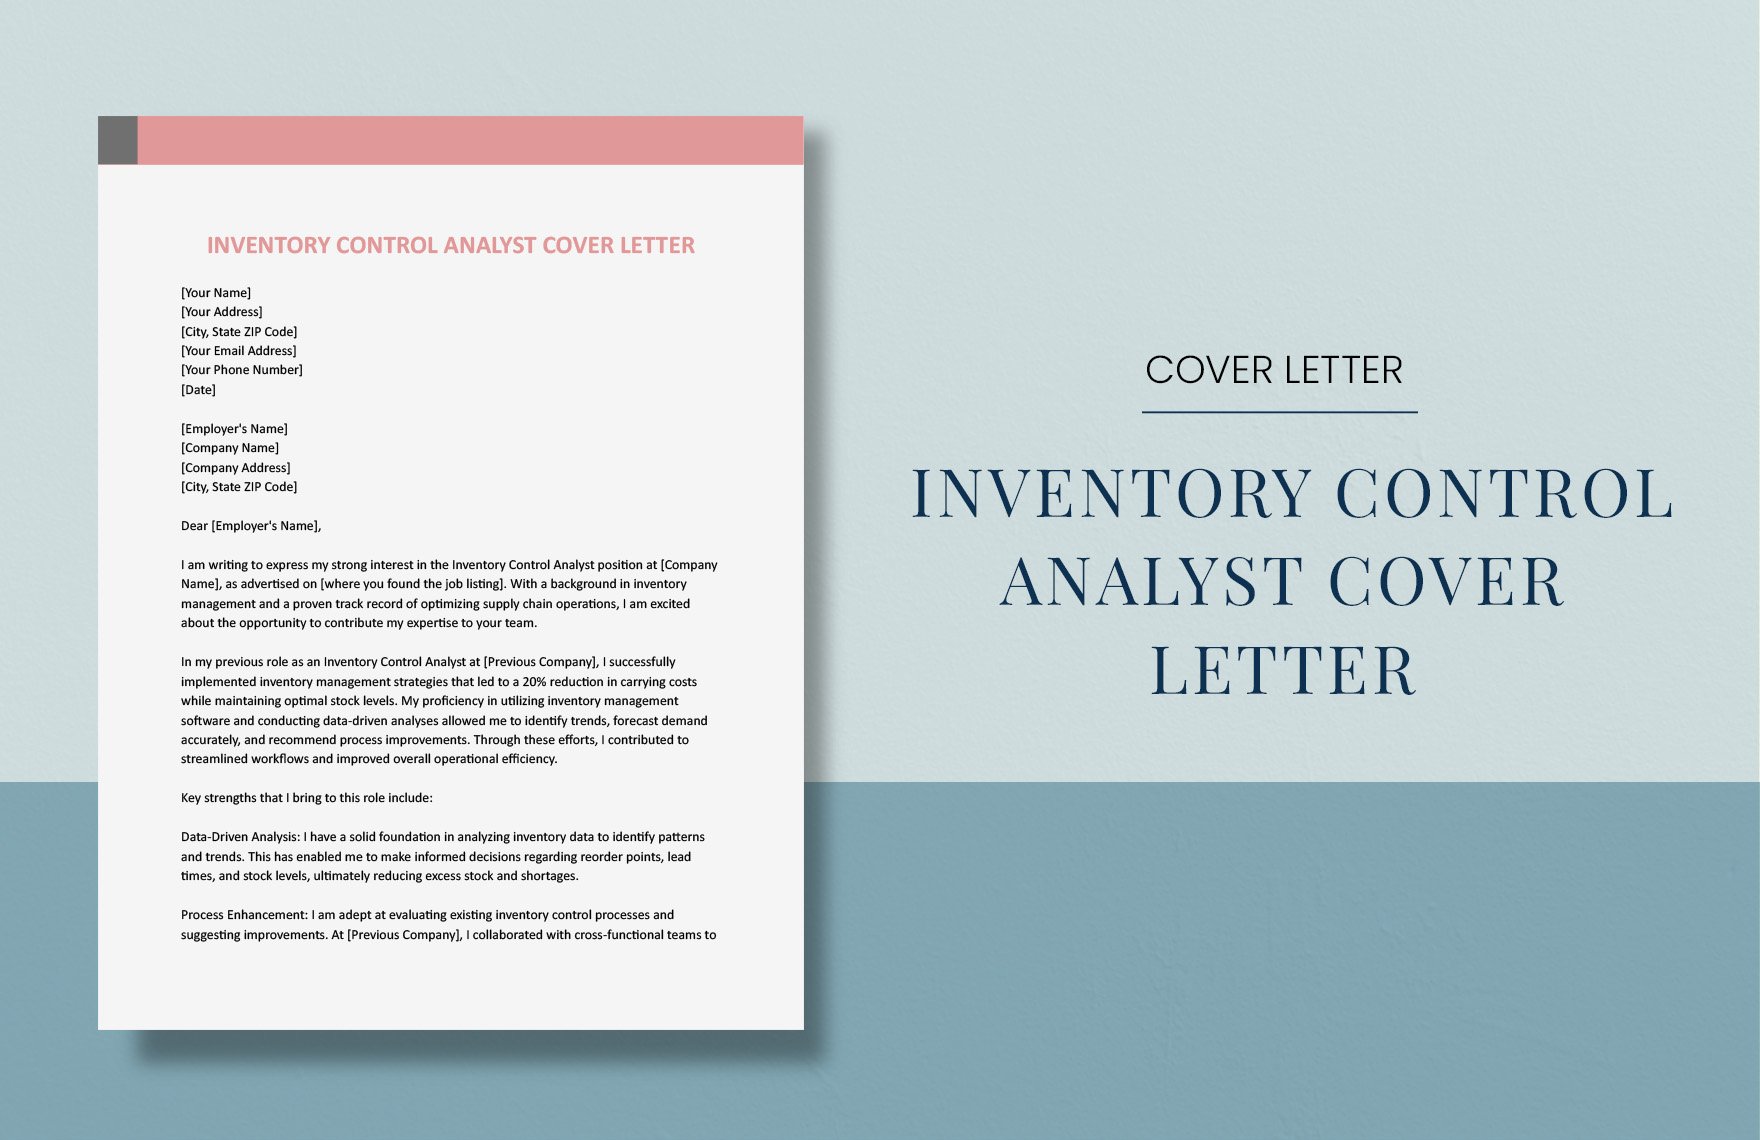 Inventory Control Analyst Cover Letter